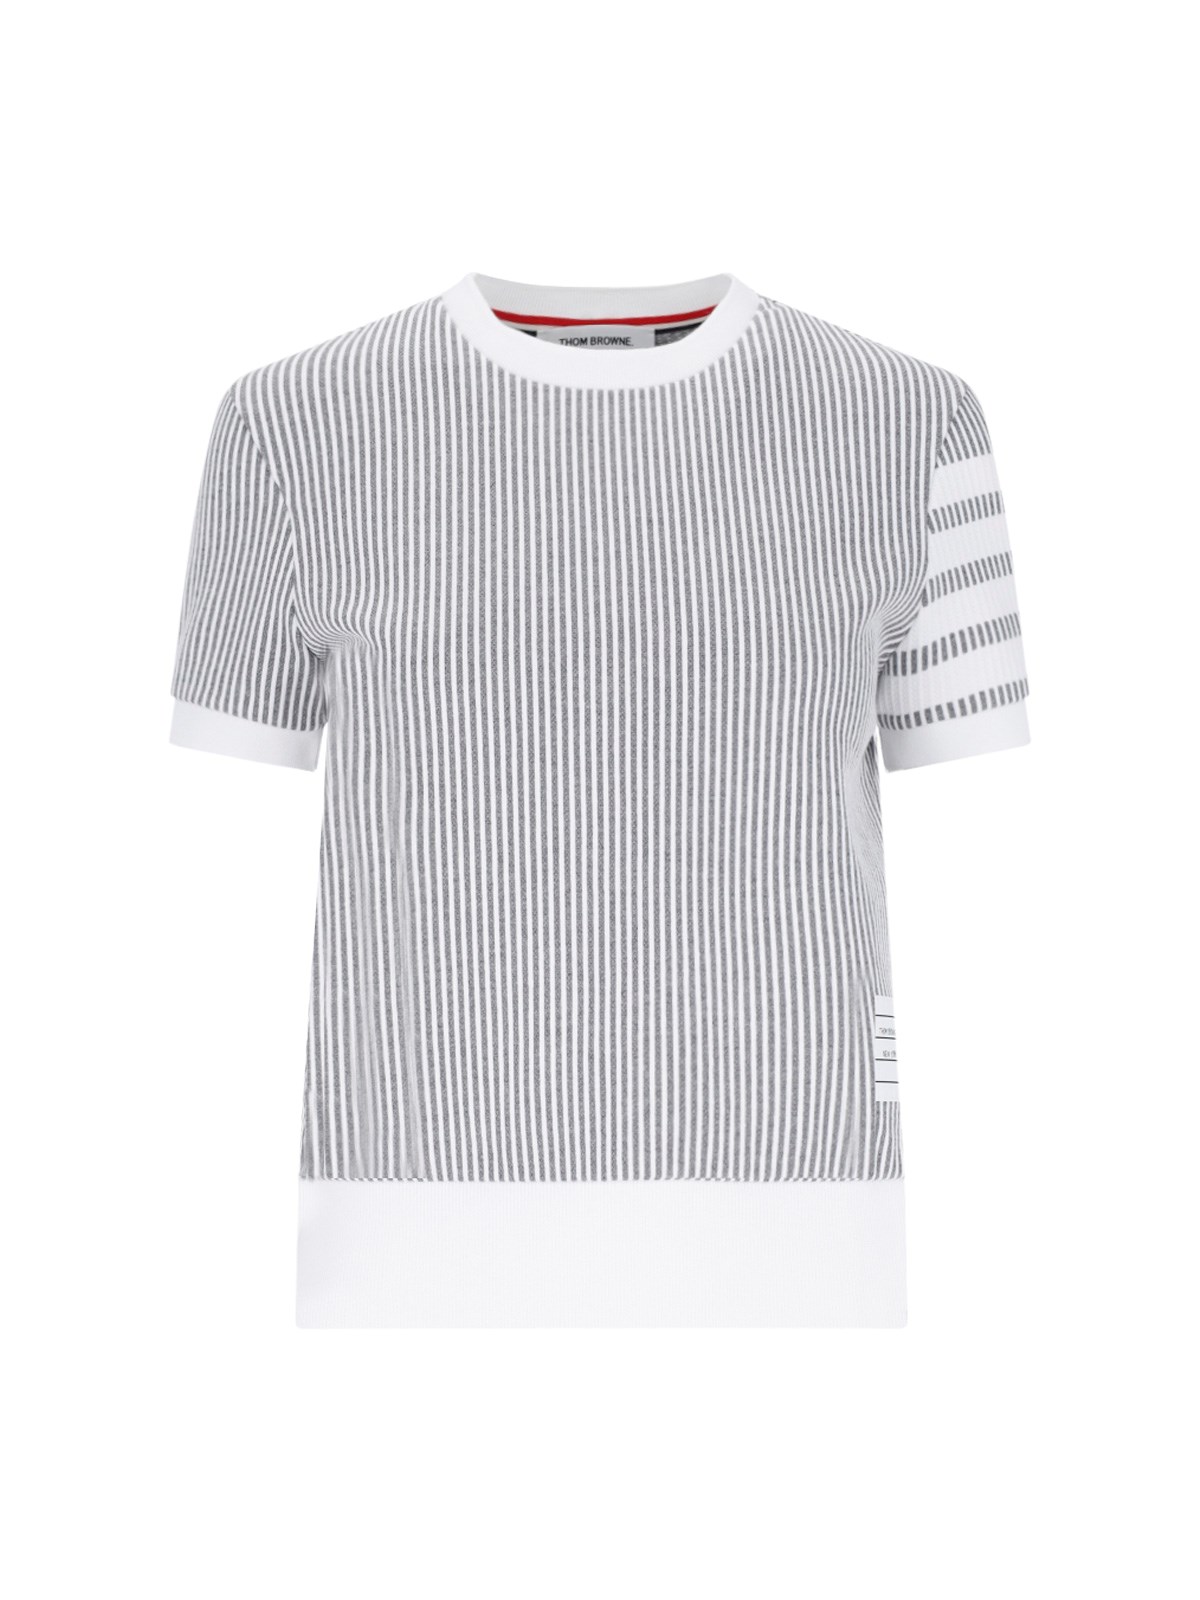 Thom Browne Striped Top In Gray